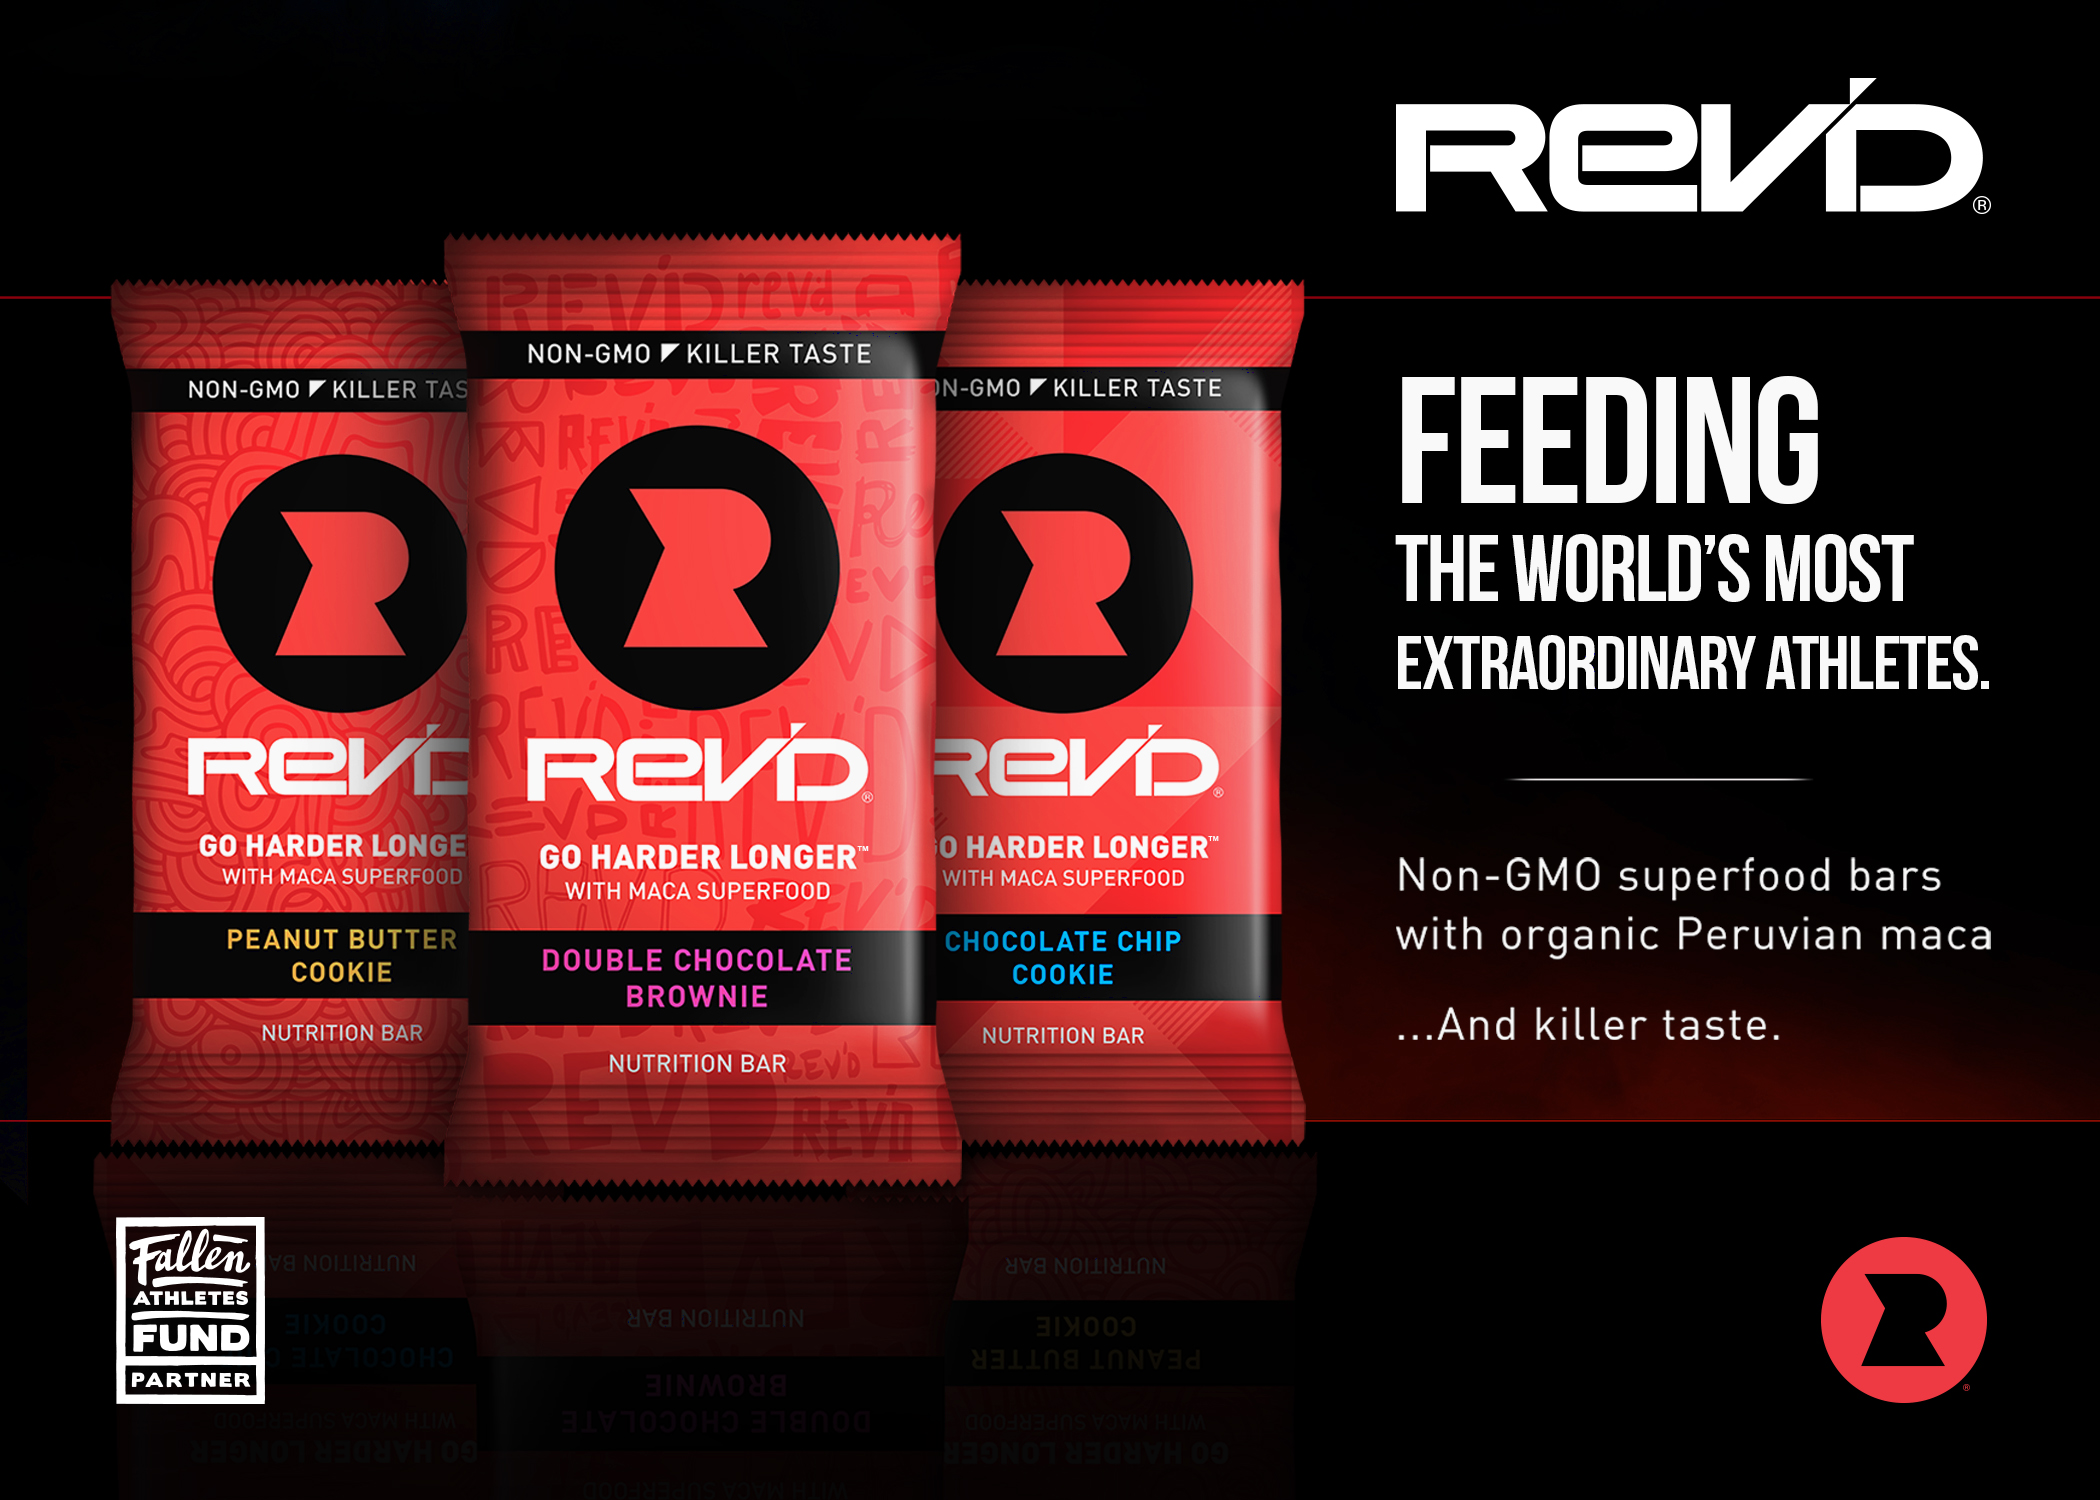 REV'D Feeds the World's Most Extraordinary Athletes